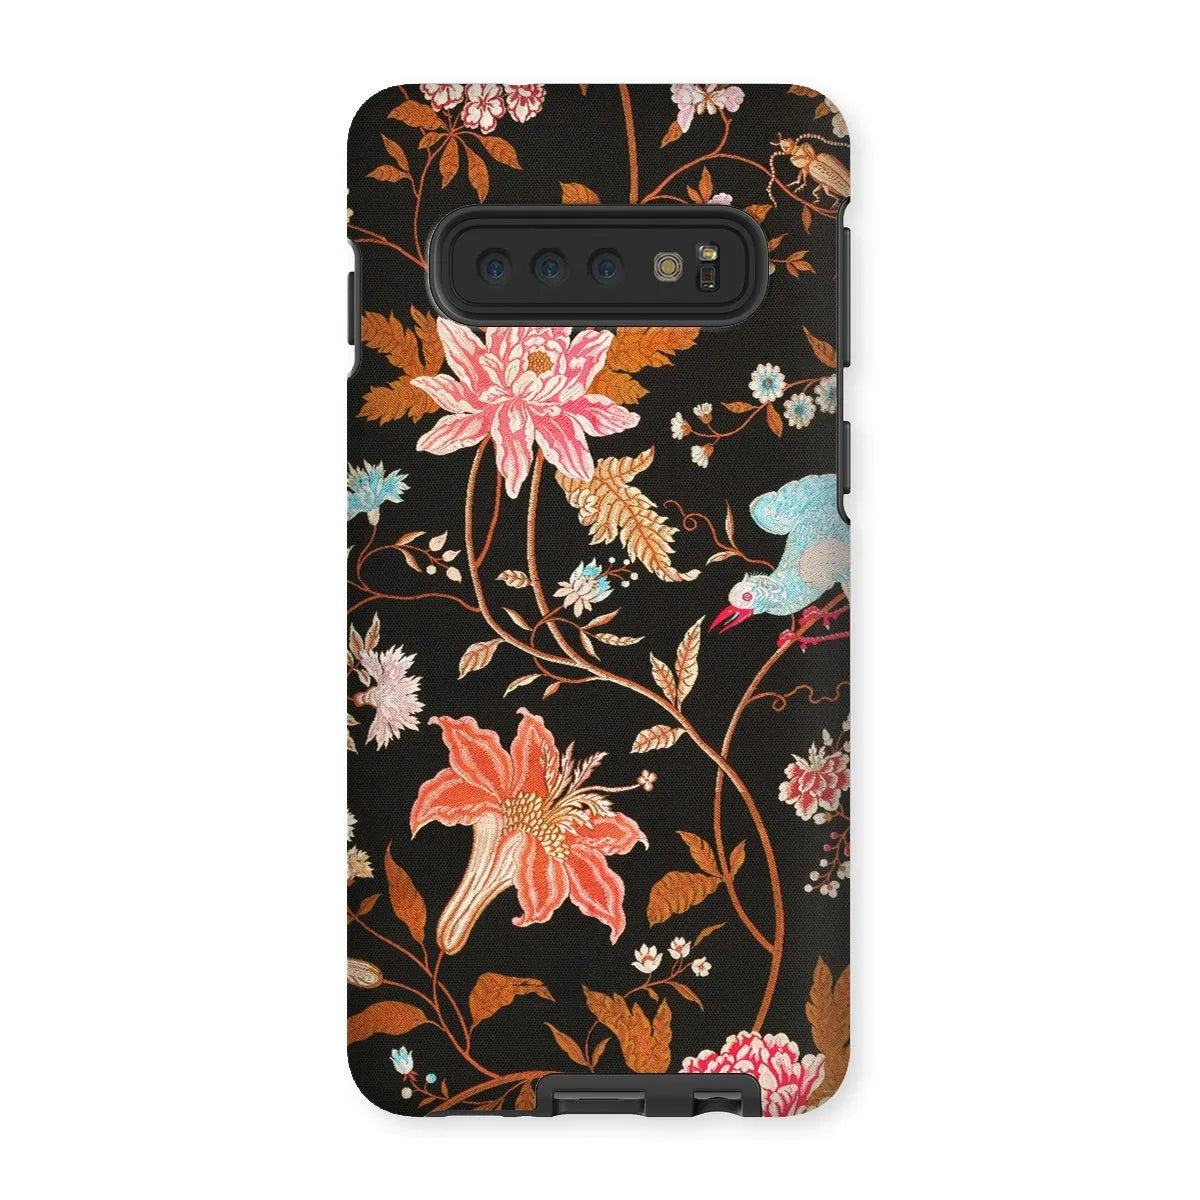 Midnight Call - Indian Aesthetic Fabric Art Phone Case - Samsung Galaxy S10 / Matte - Mobile Phone Cases - Aesthetic Art